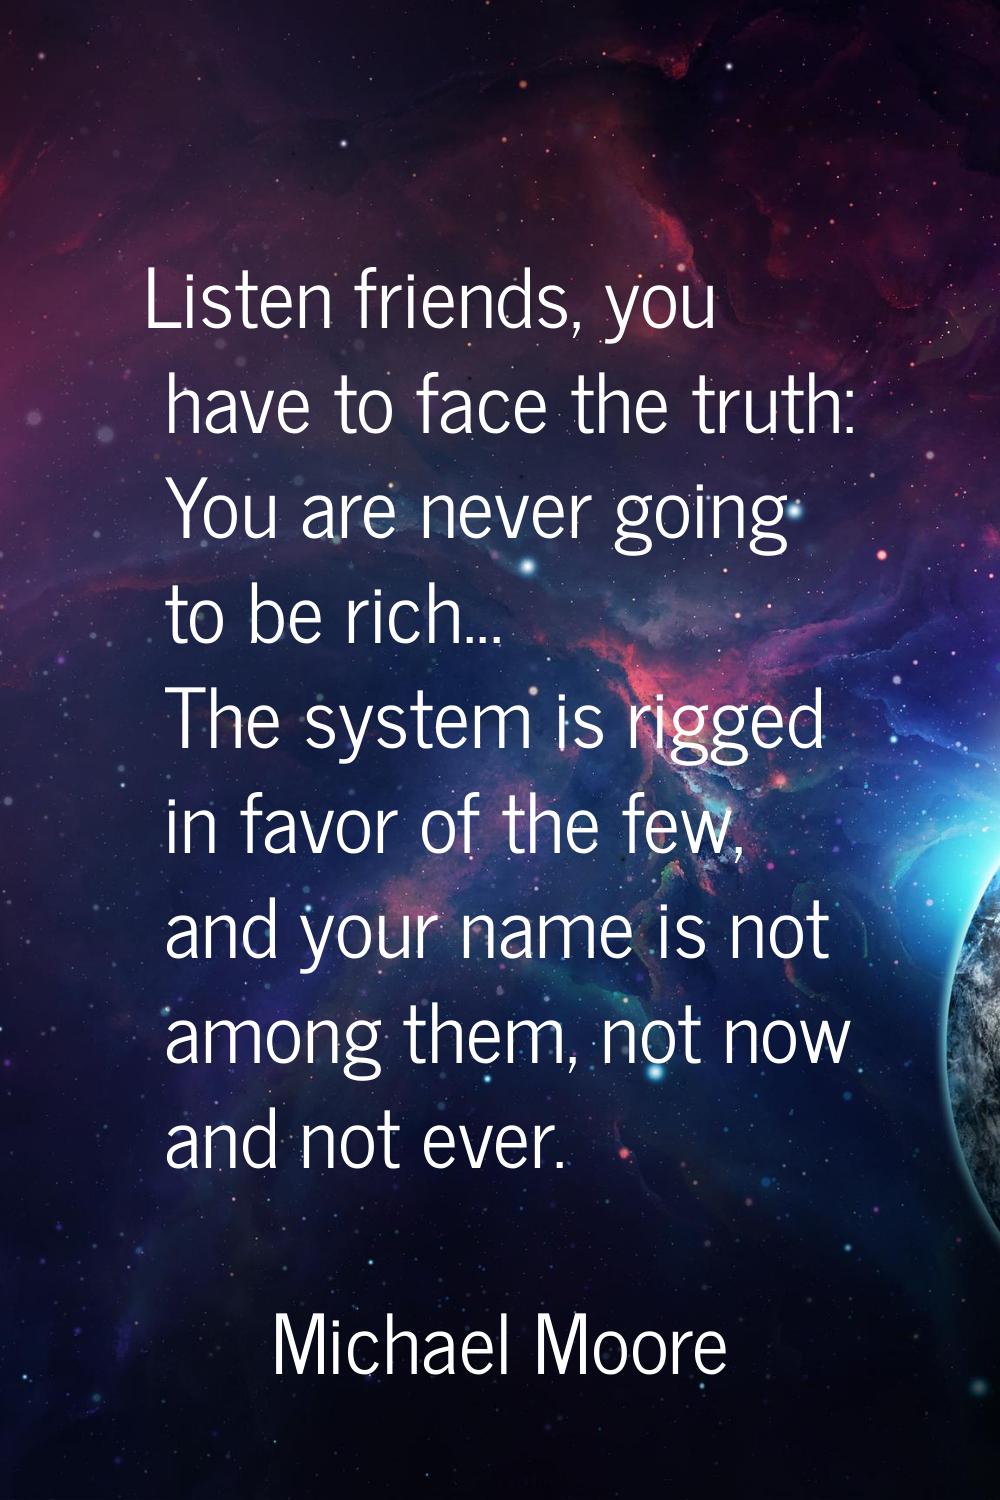 Listen friends, you have to face the truth: You are never going to be rich... The system is rigged 